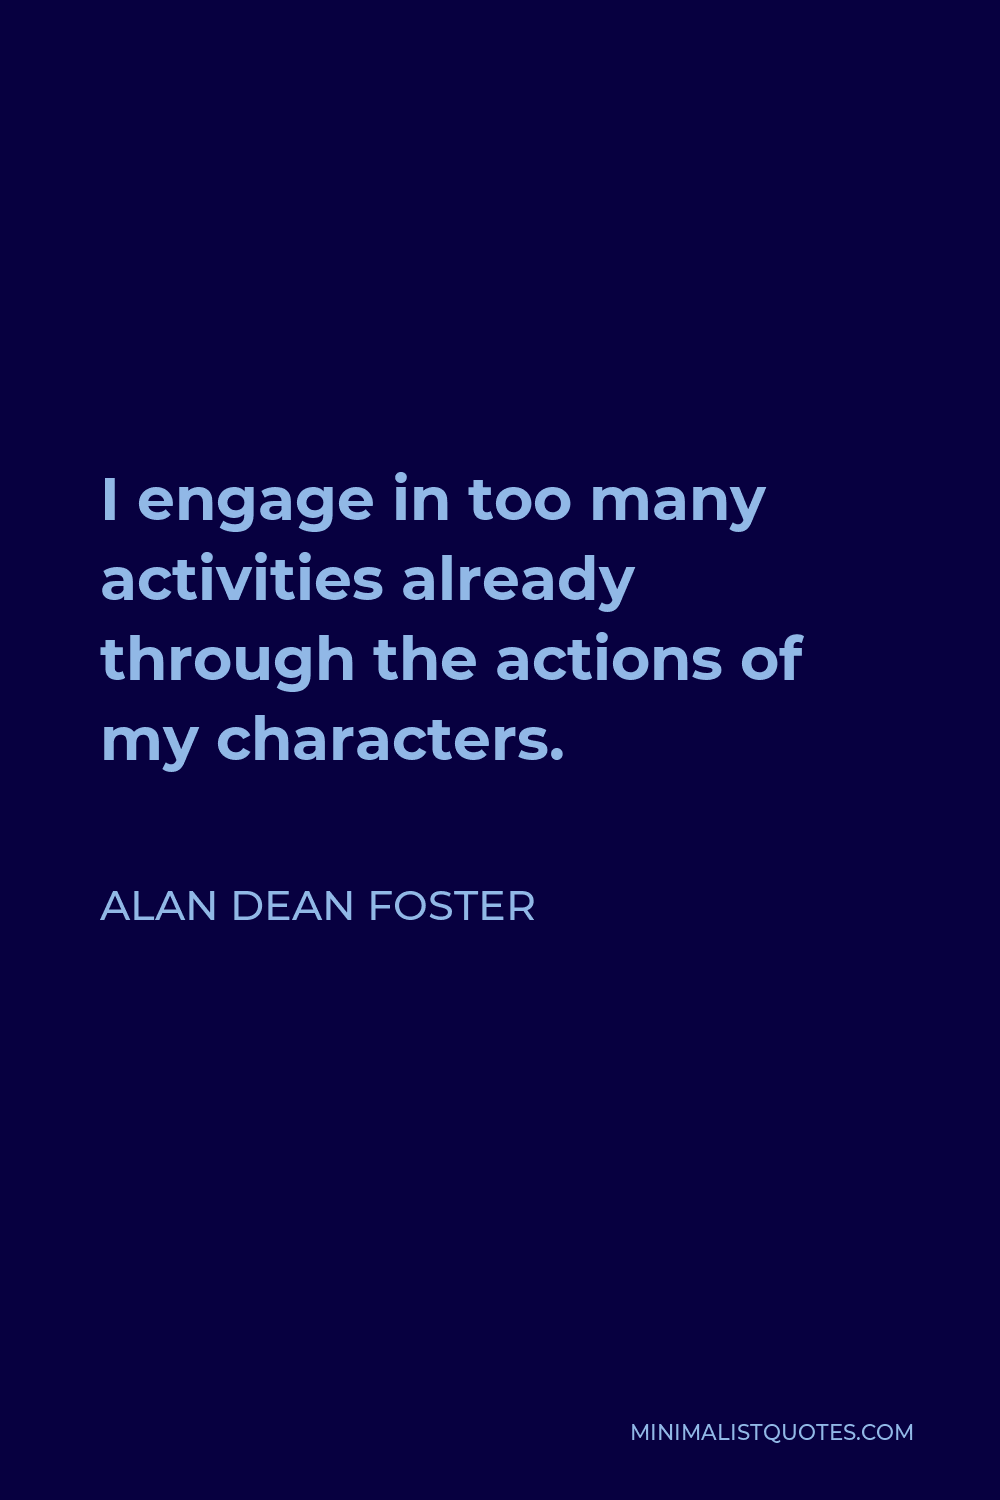 Alan Dean Foster Quote - I engage in too many activities already through the actions of my characters.